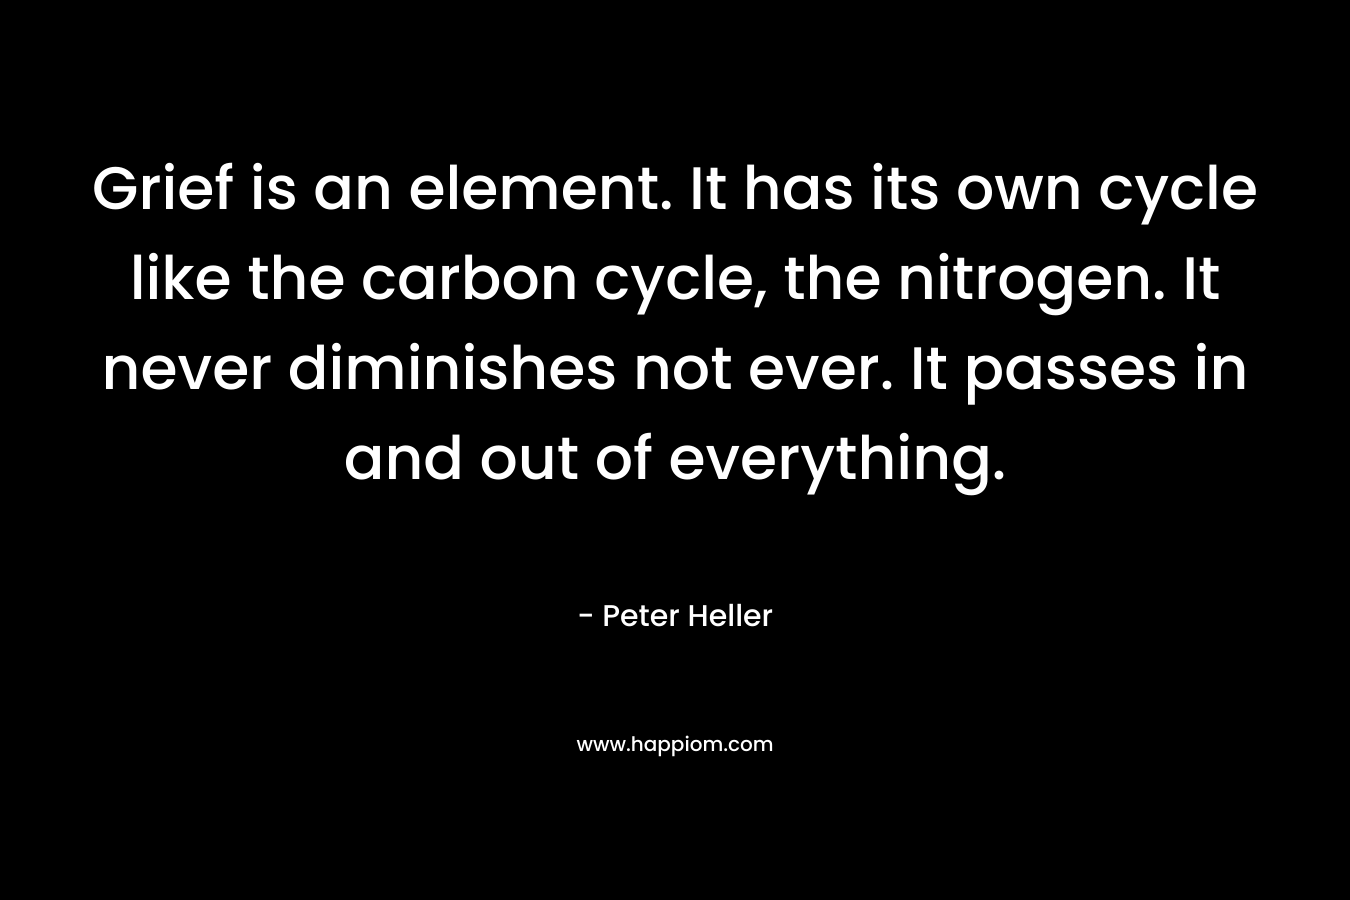 Grief is an element. It has its own cycle like the carbon cycle, the nitrogen. It never diminishes not ever. It passes in and out of everything. – Peter Heller